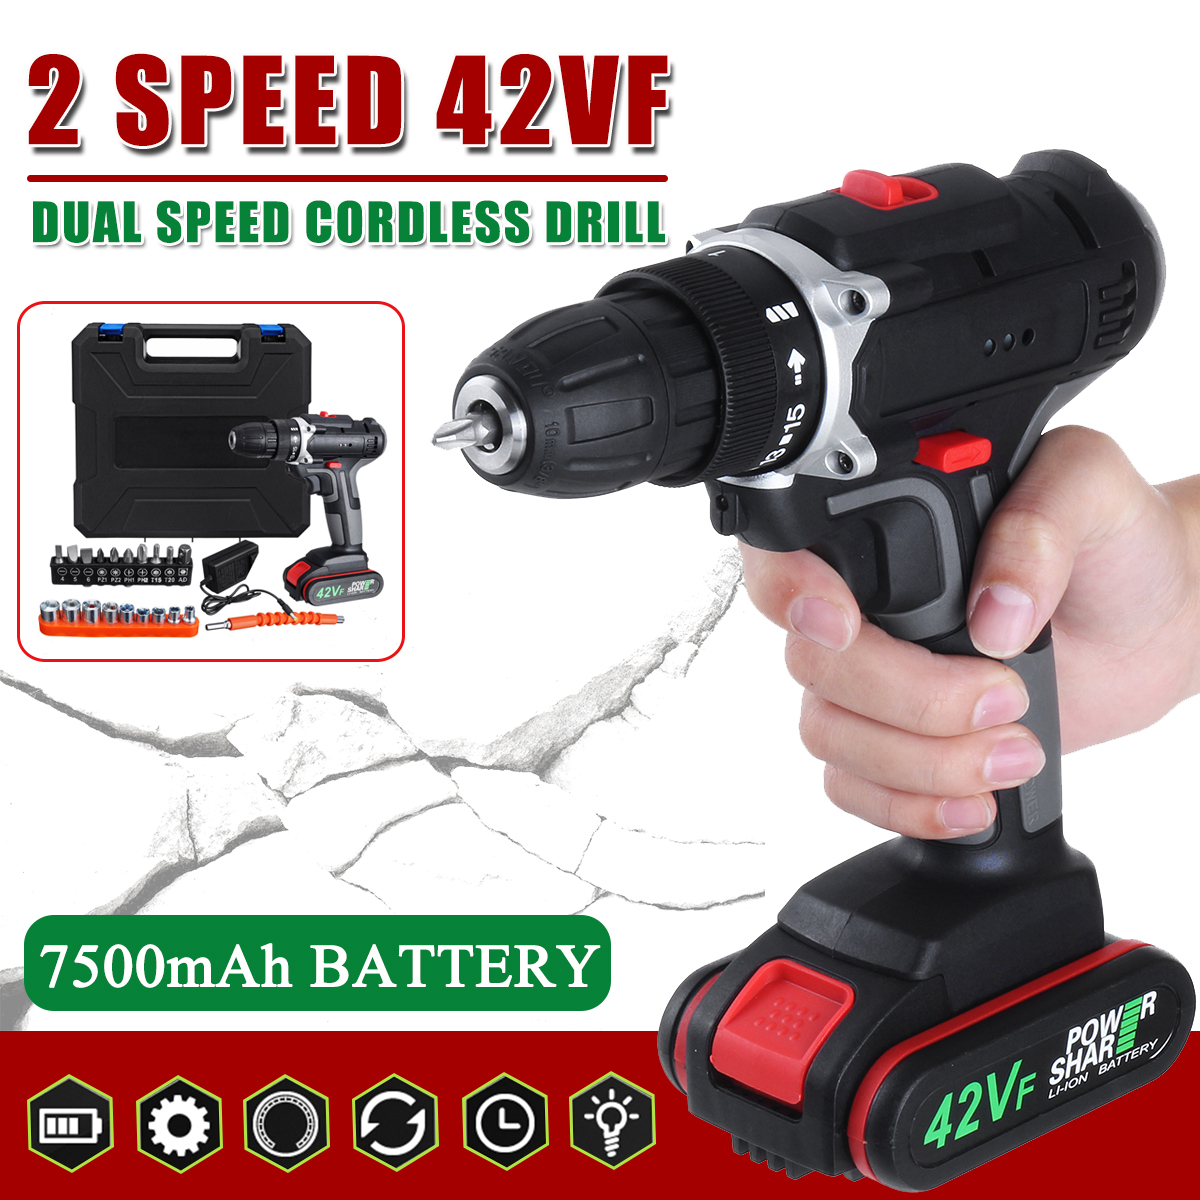 7500mAh-Multifunctional-Electric-Drill-Dual-Speed-Cordless-Power-Screwdriver-Set-with-Li-ion-Battery-1474478-1